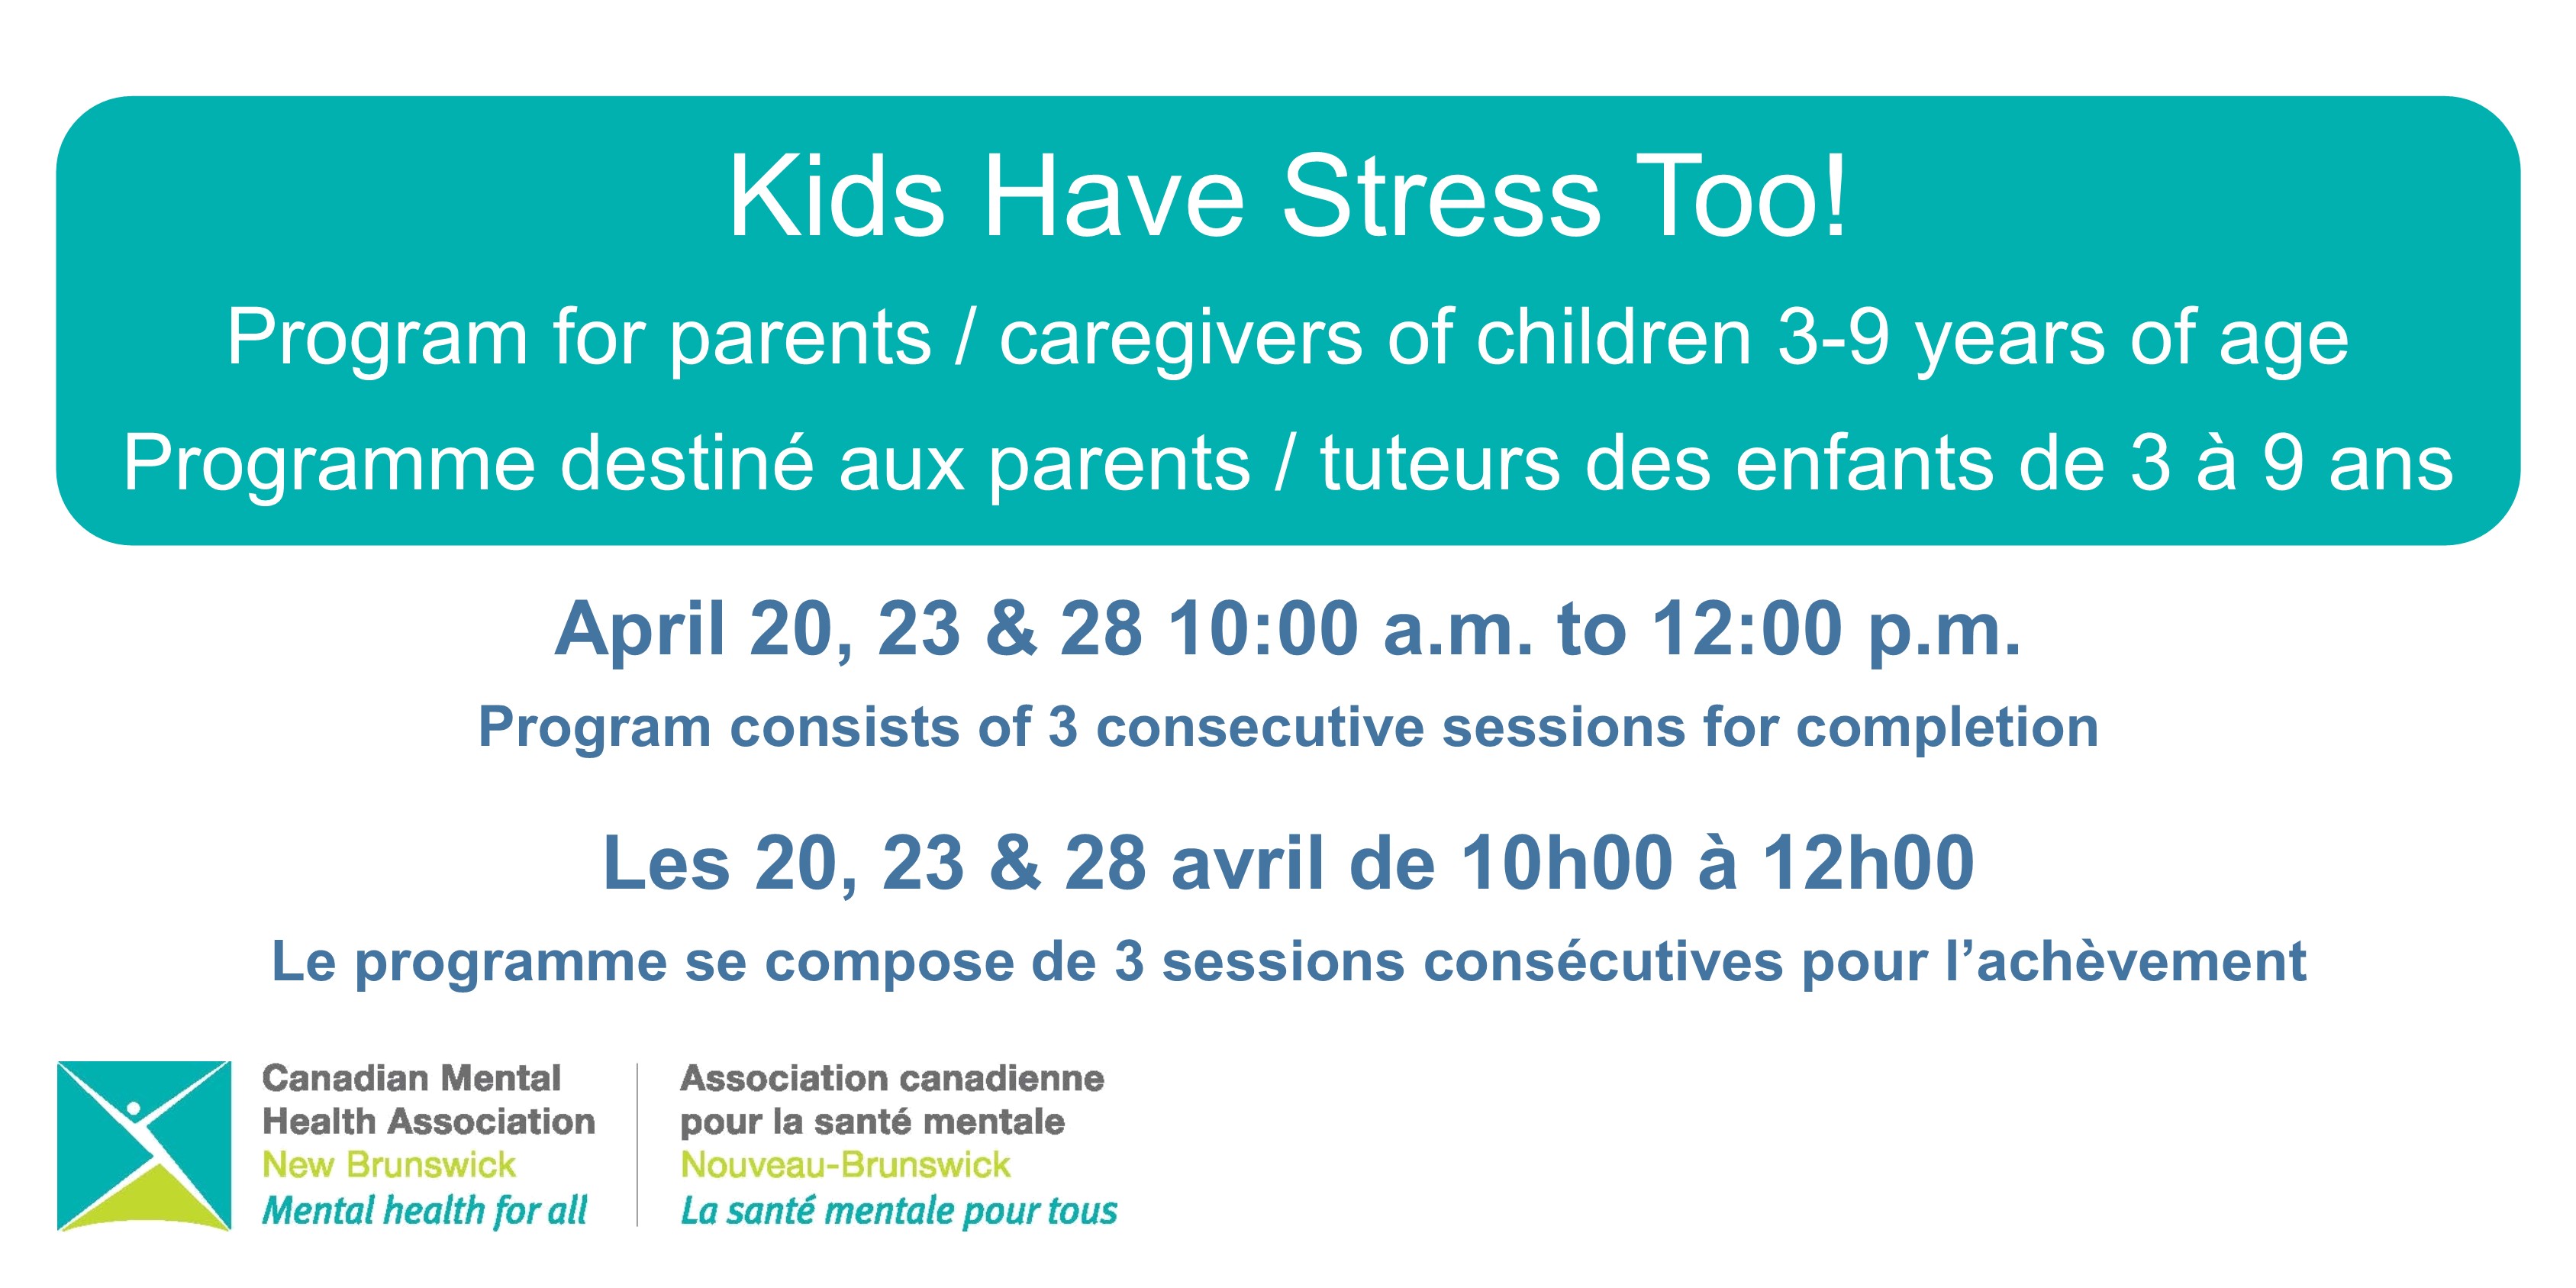 Kids Have Stress Too